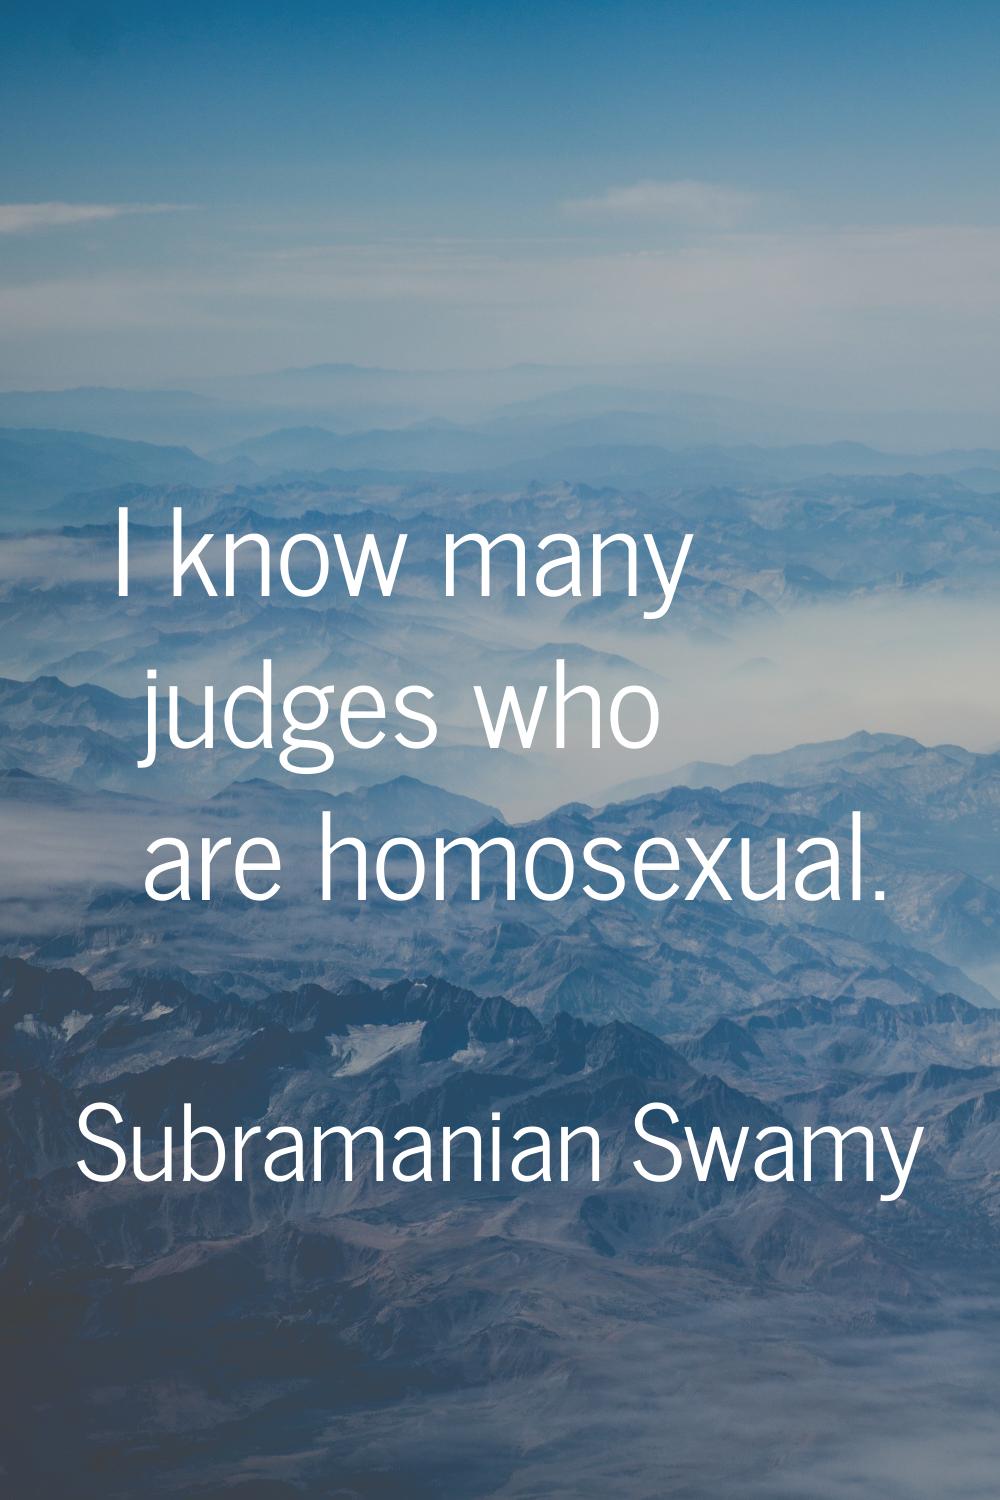 I know many judges who are homosexual.